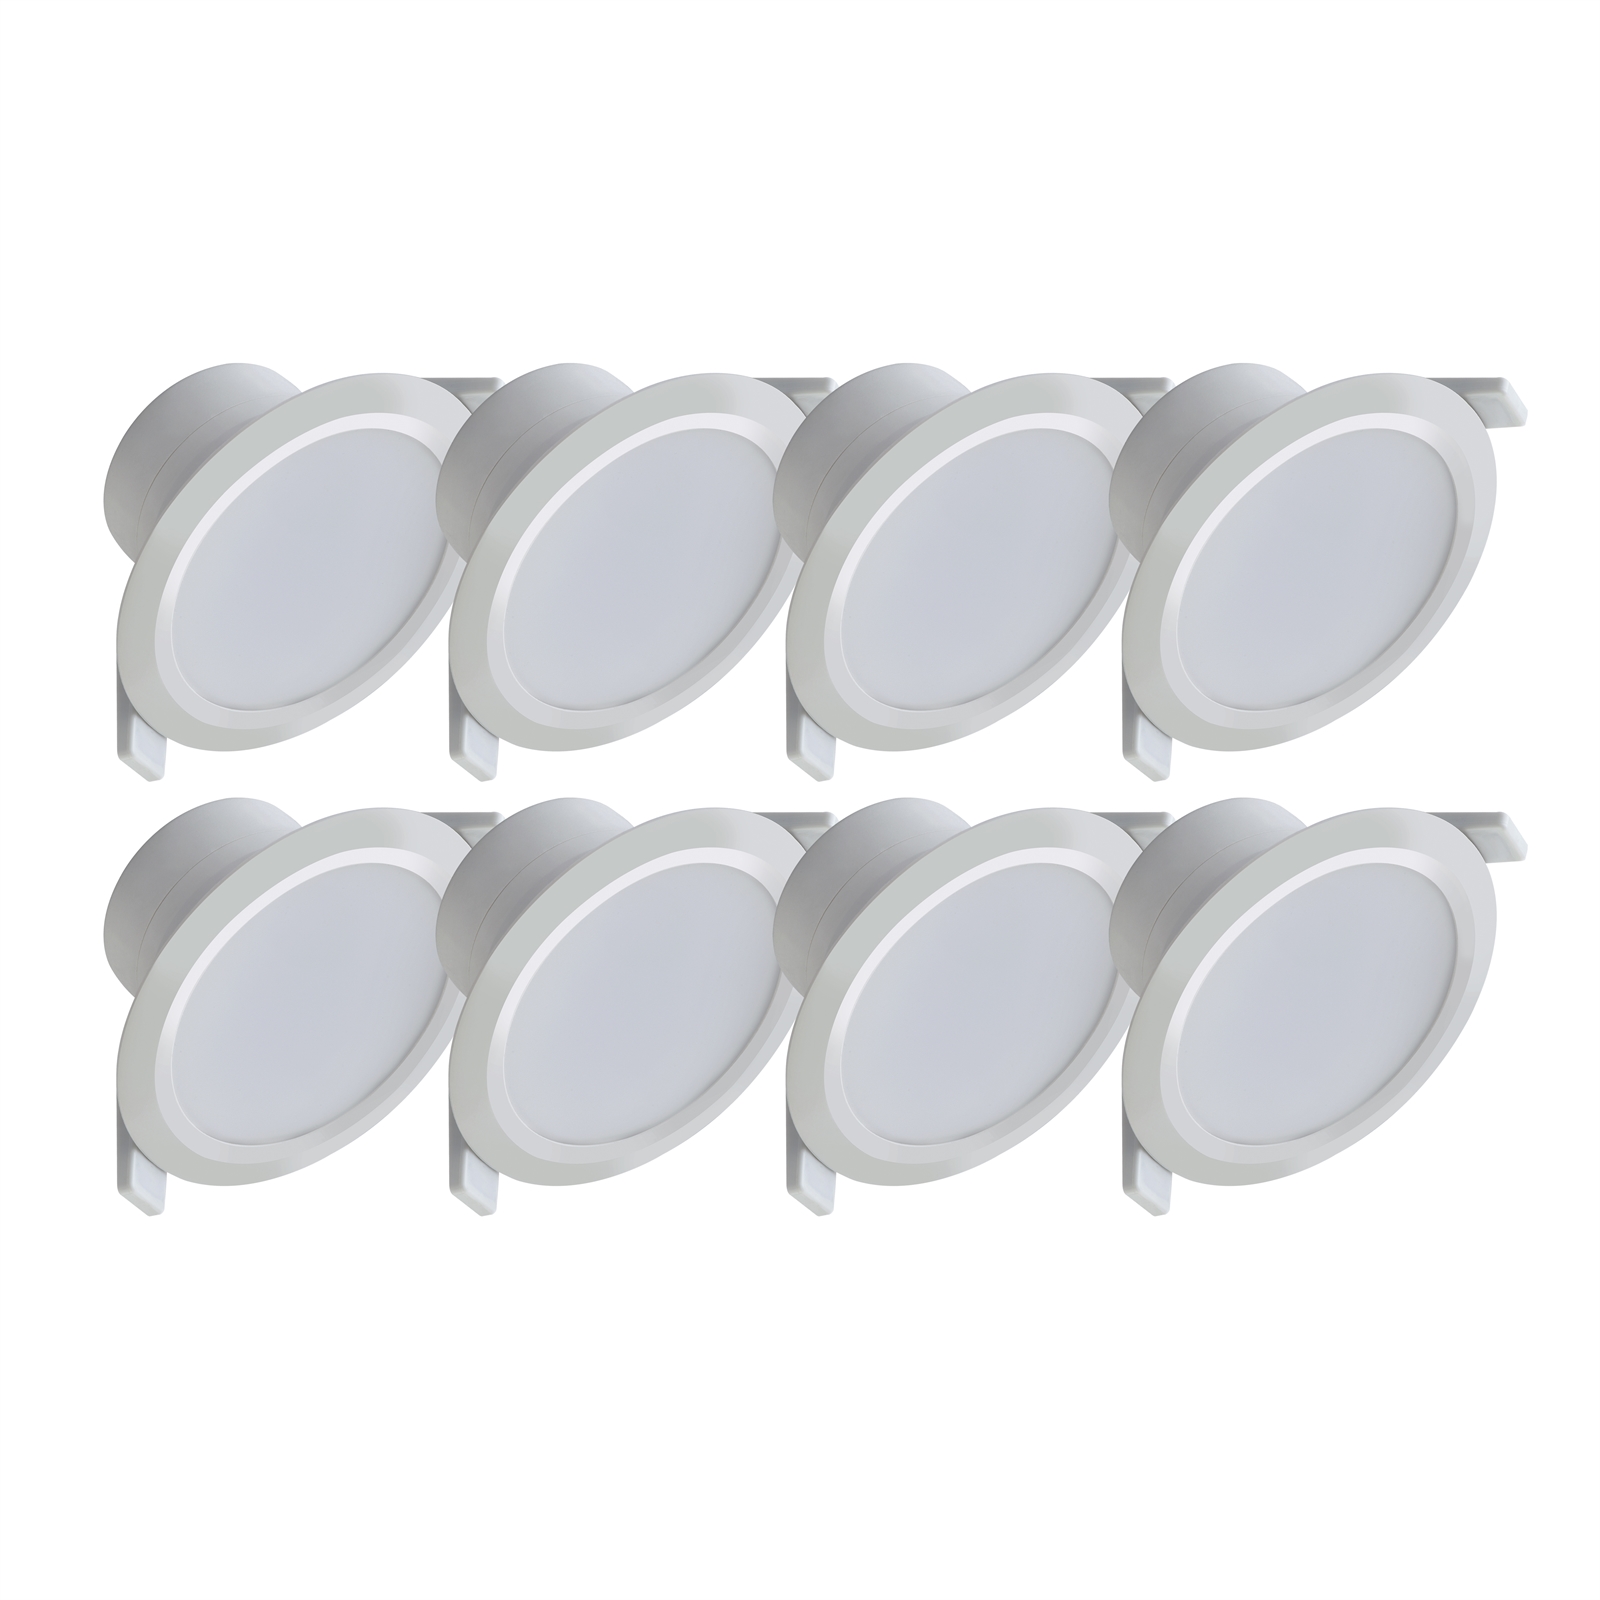 Deta 7W Warm White Dimmable LED Downlight - 8 Pack